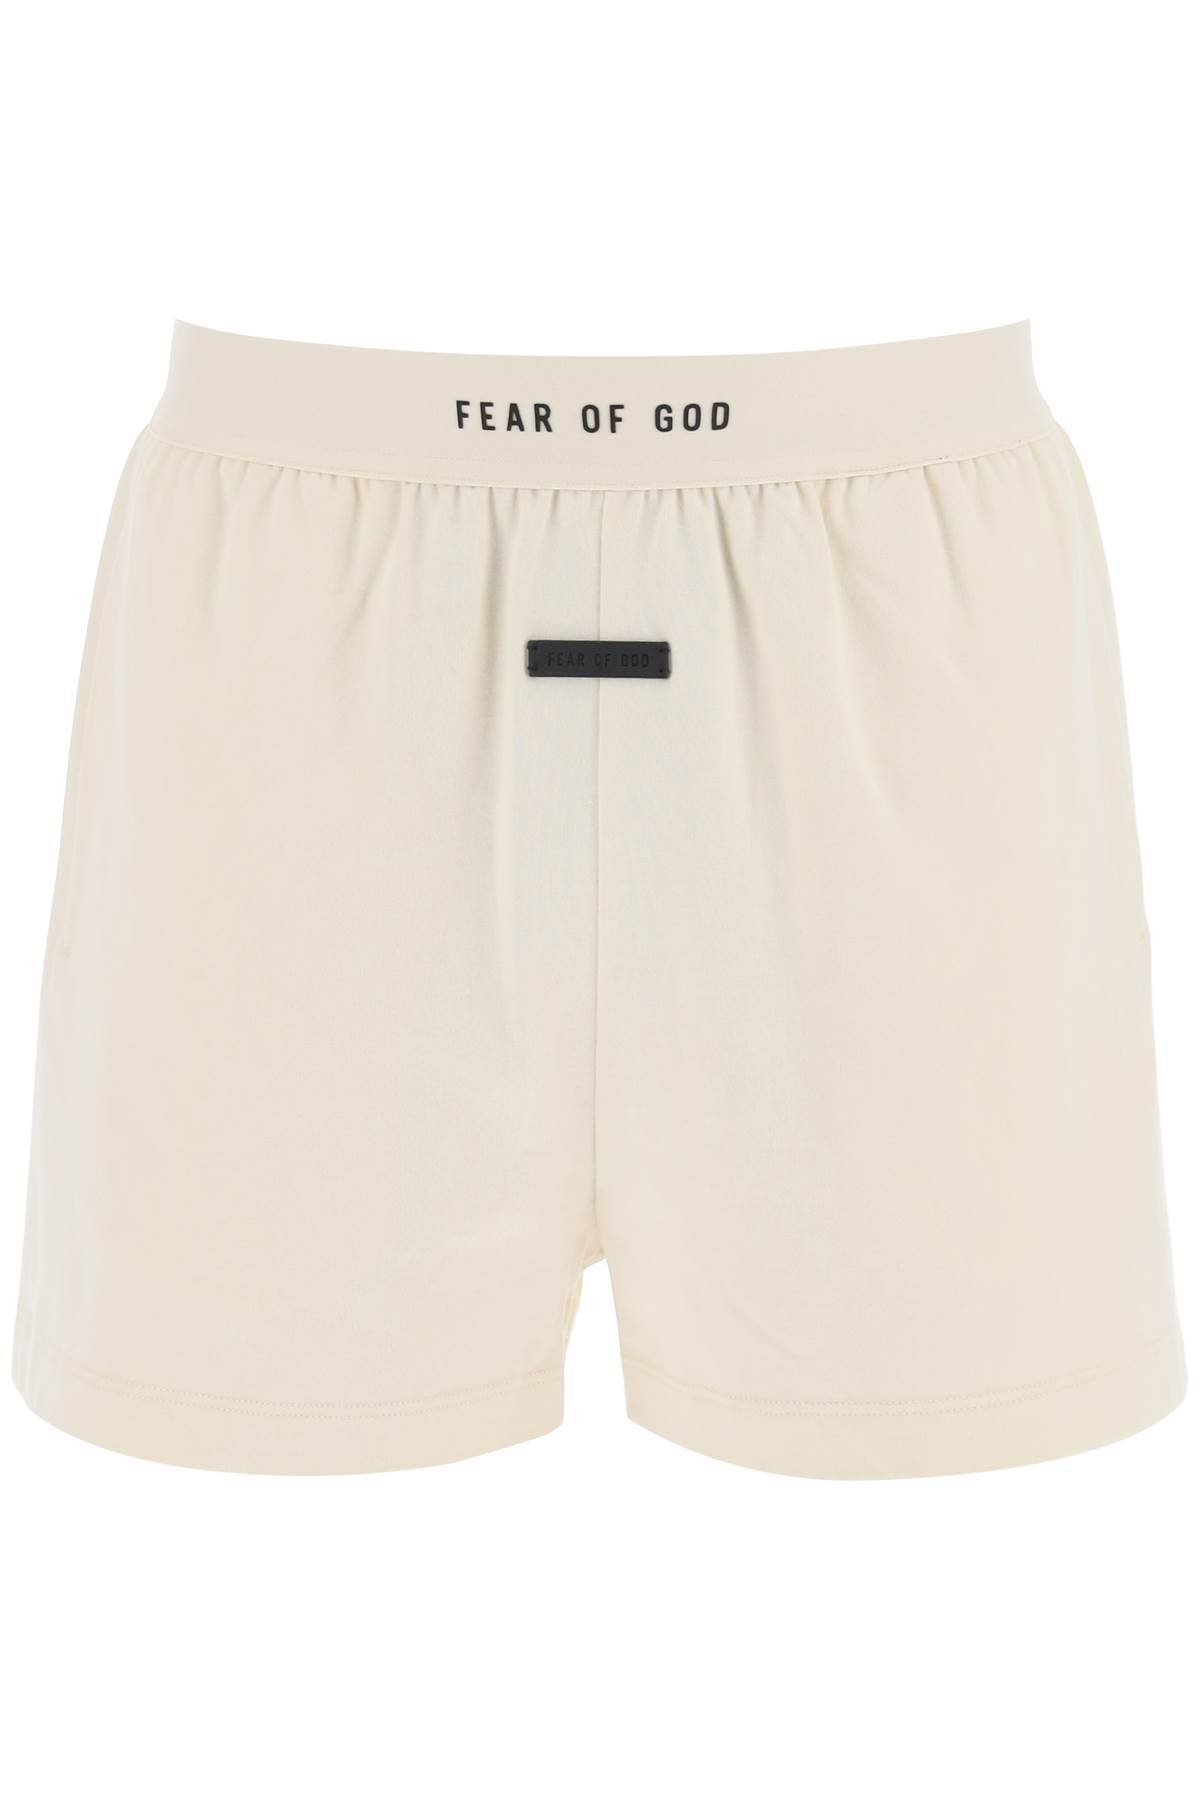 Fear Of God FEAR OF GOD the lounge boxer short